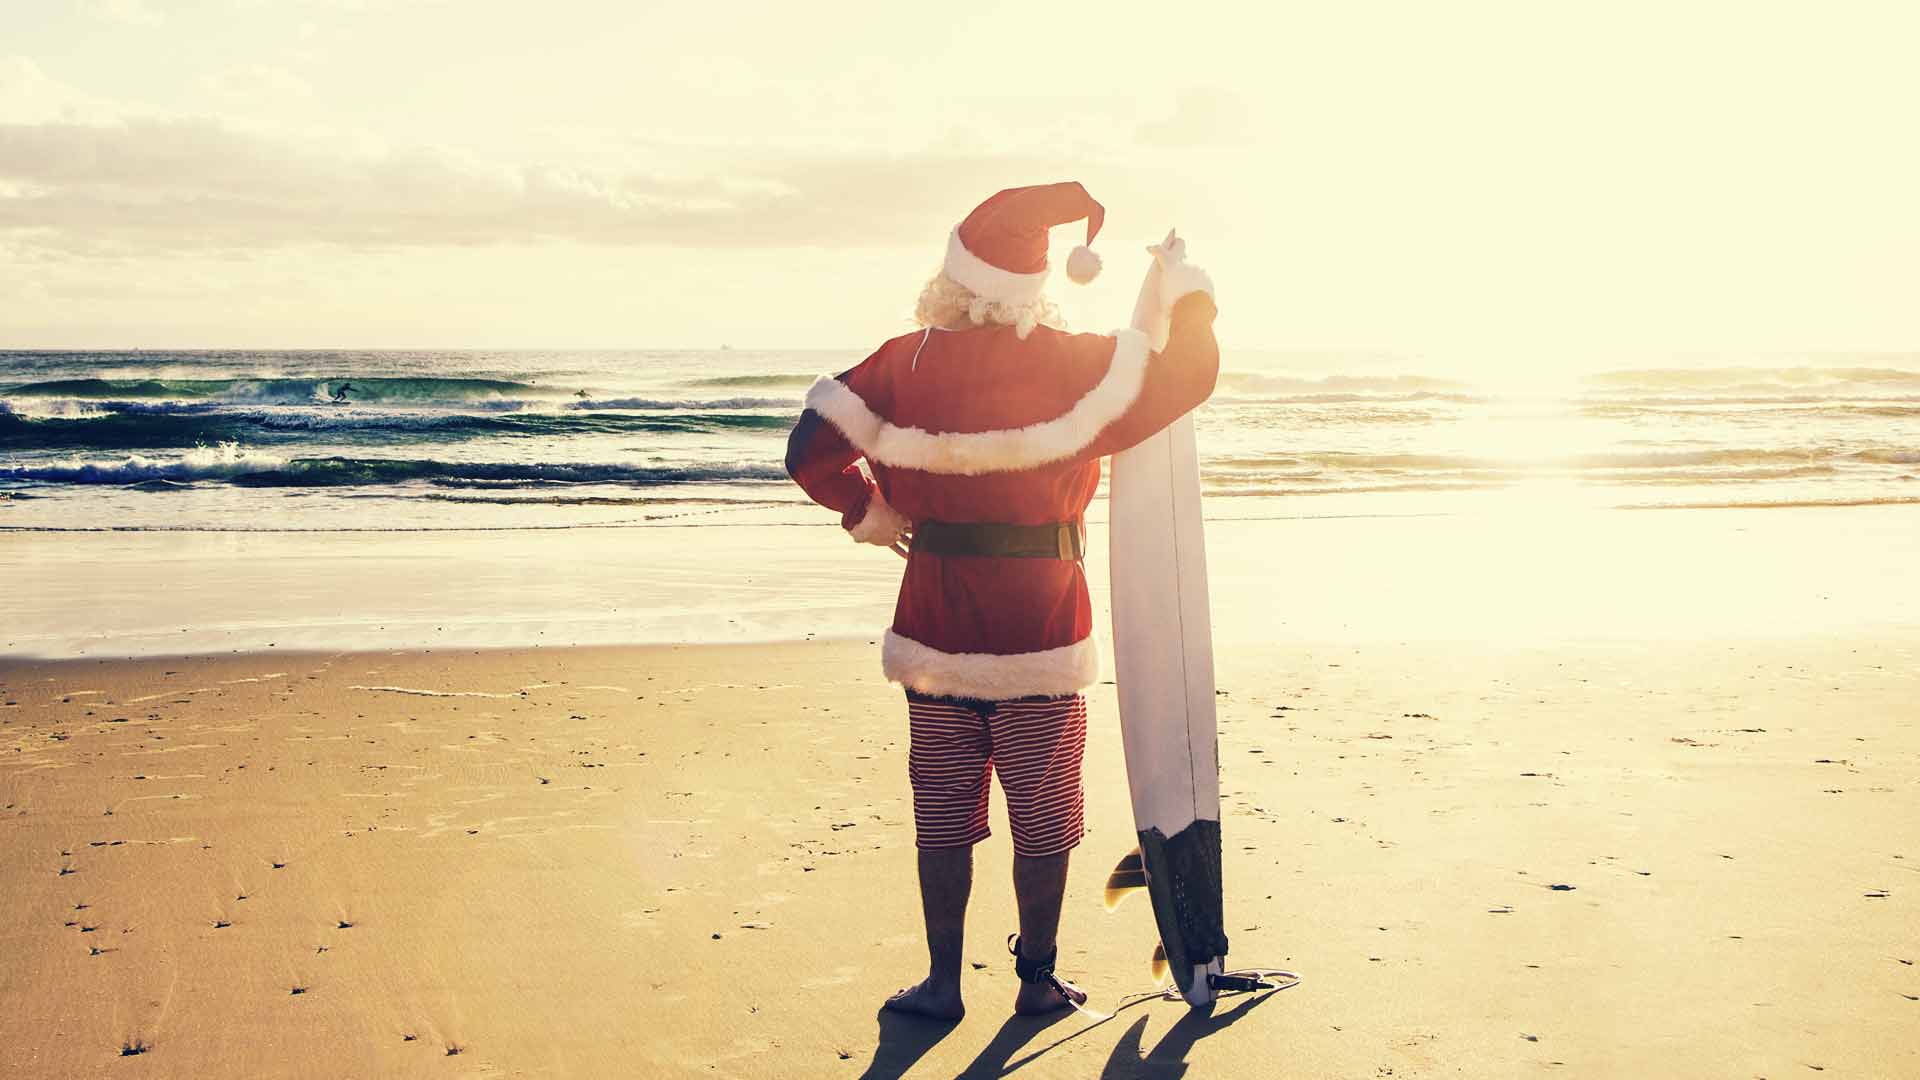 Man in a Santa Claus standing on the beach in the sunshine.